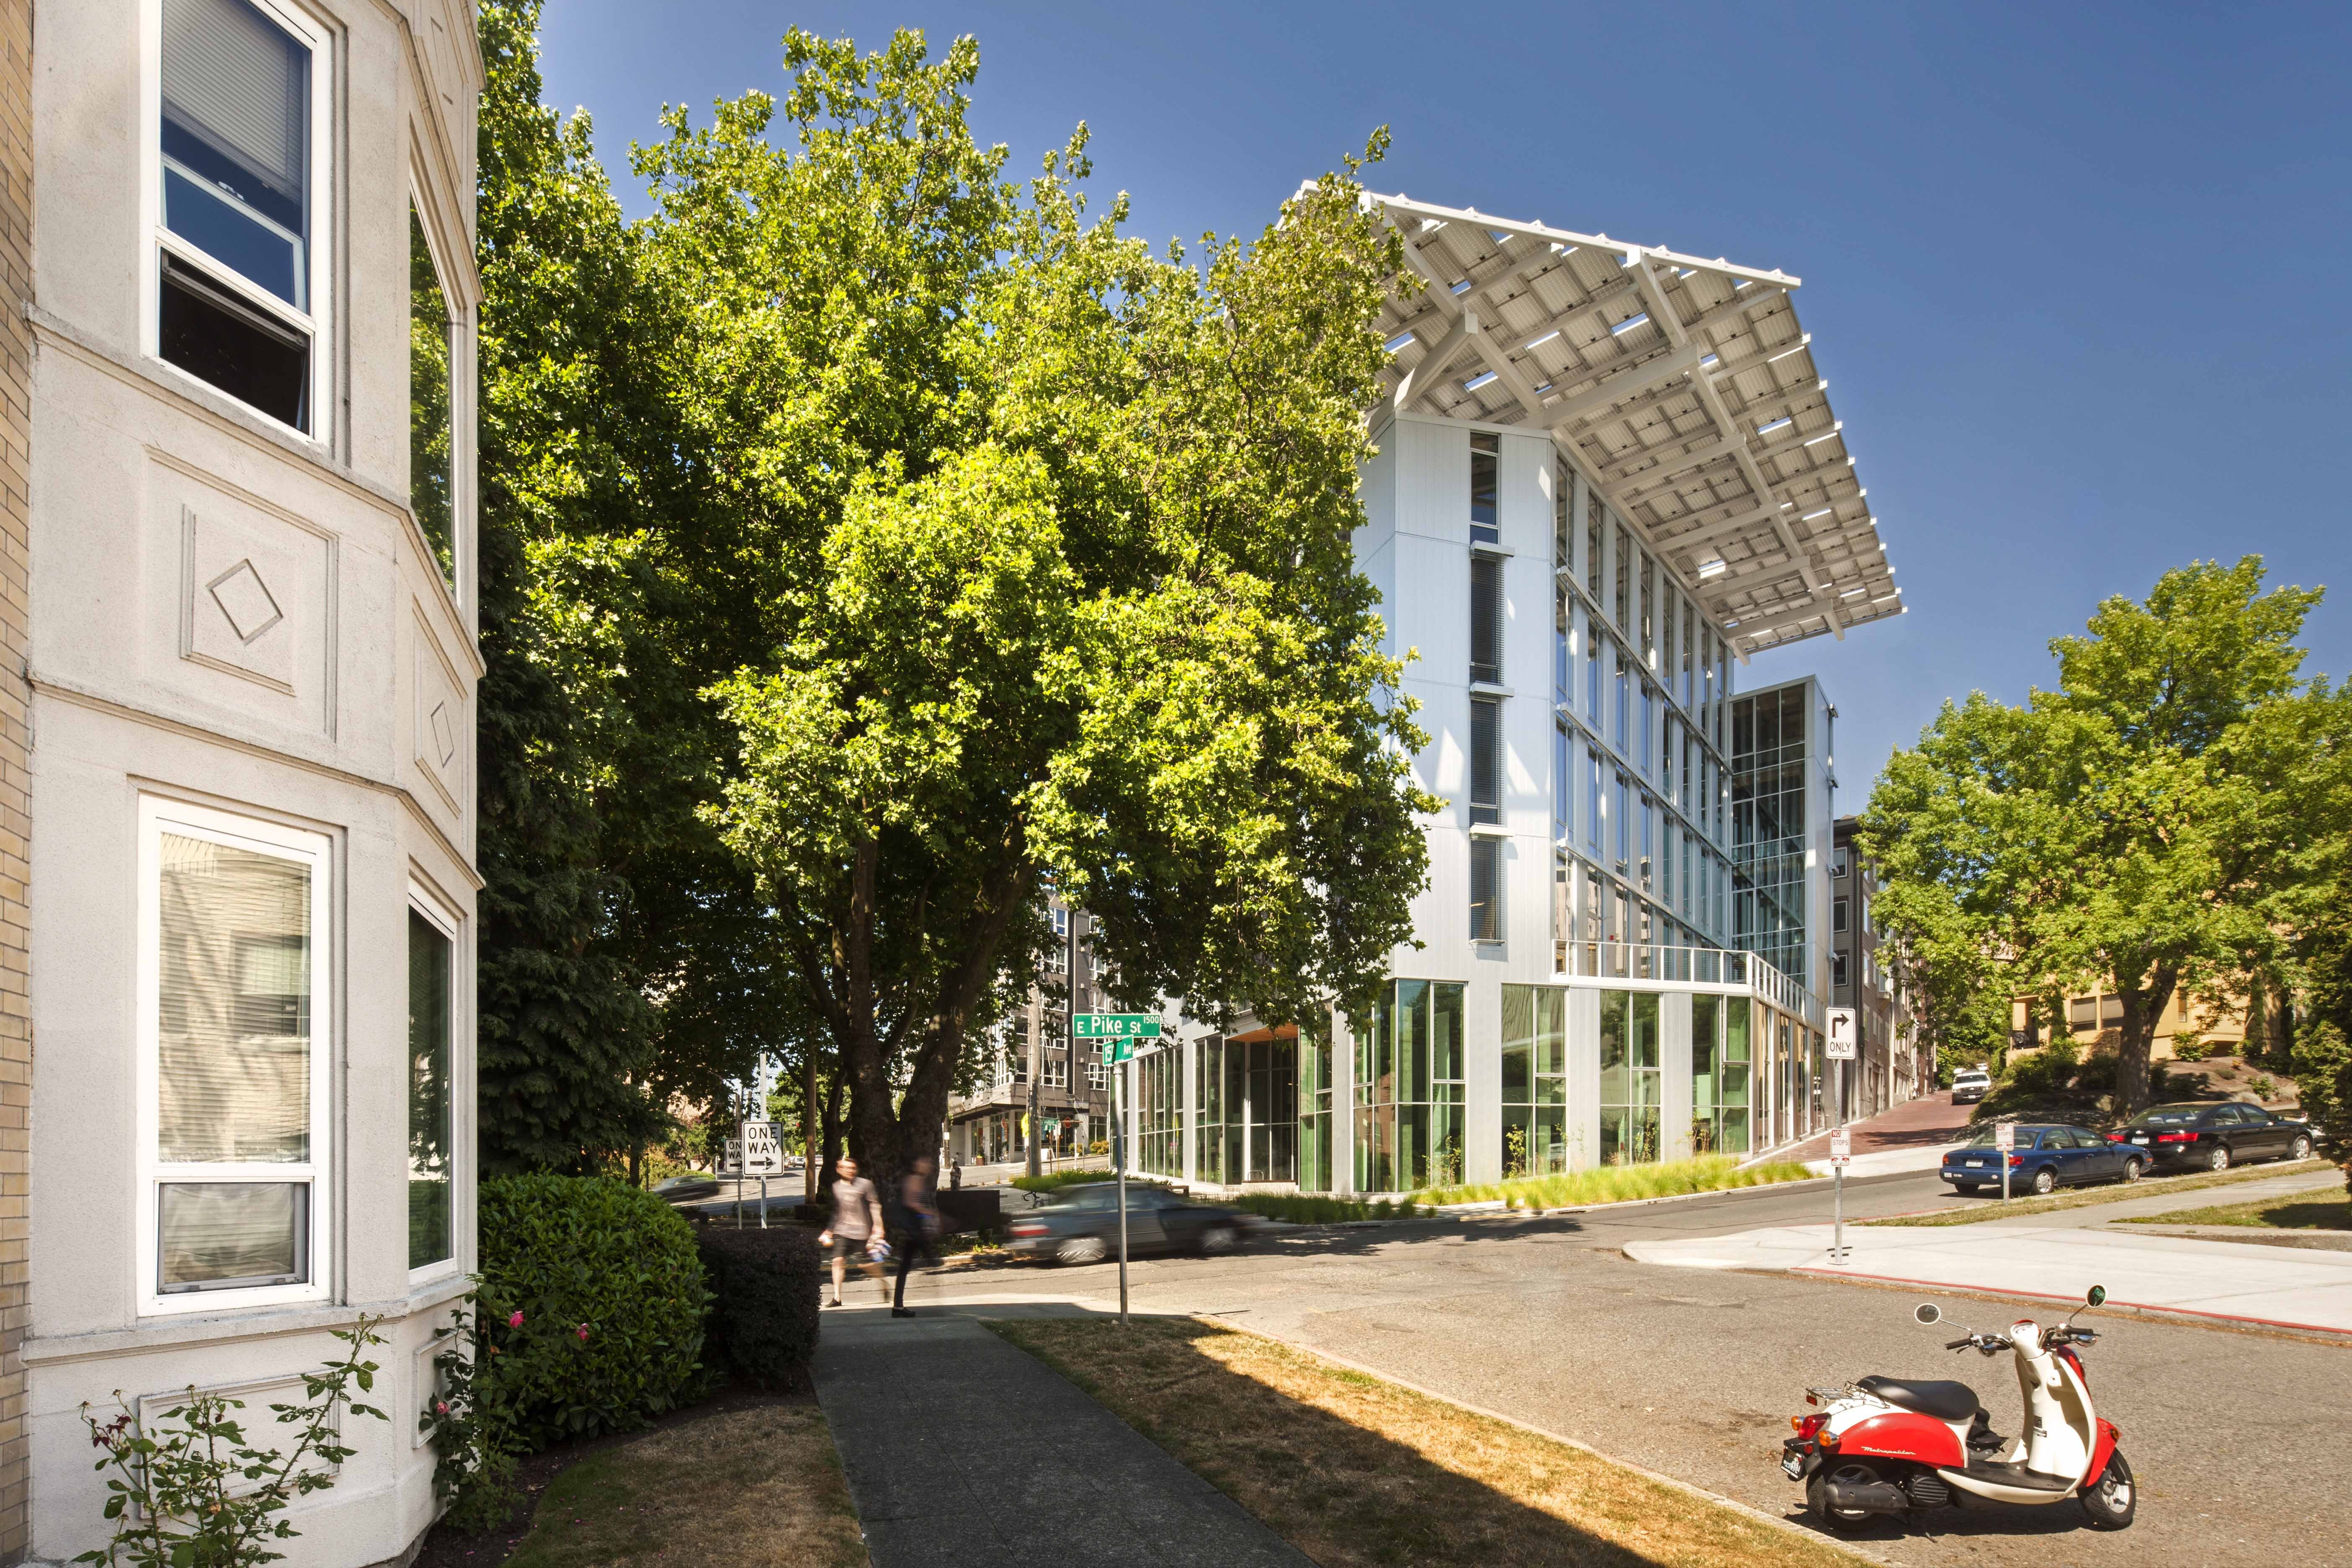 Image of the Bullitt Center with scooter out front